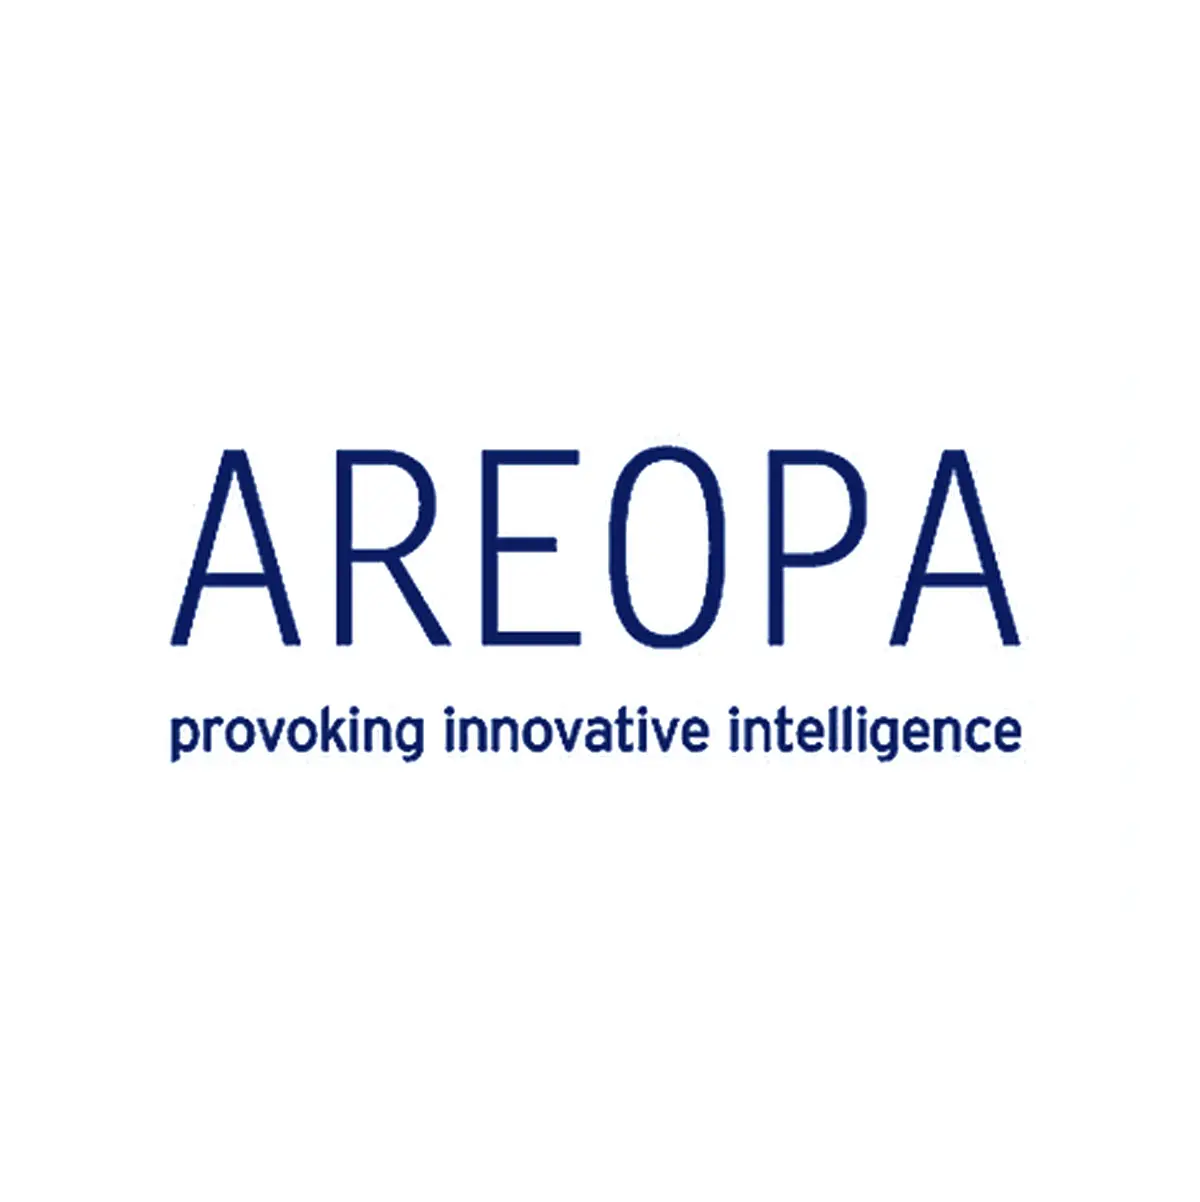 AREOPA LIMITED - PROVOKING INNOVATIVE INTELLIGENCE